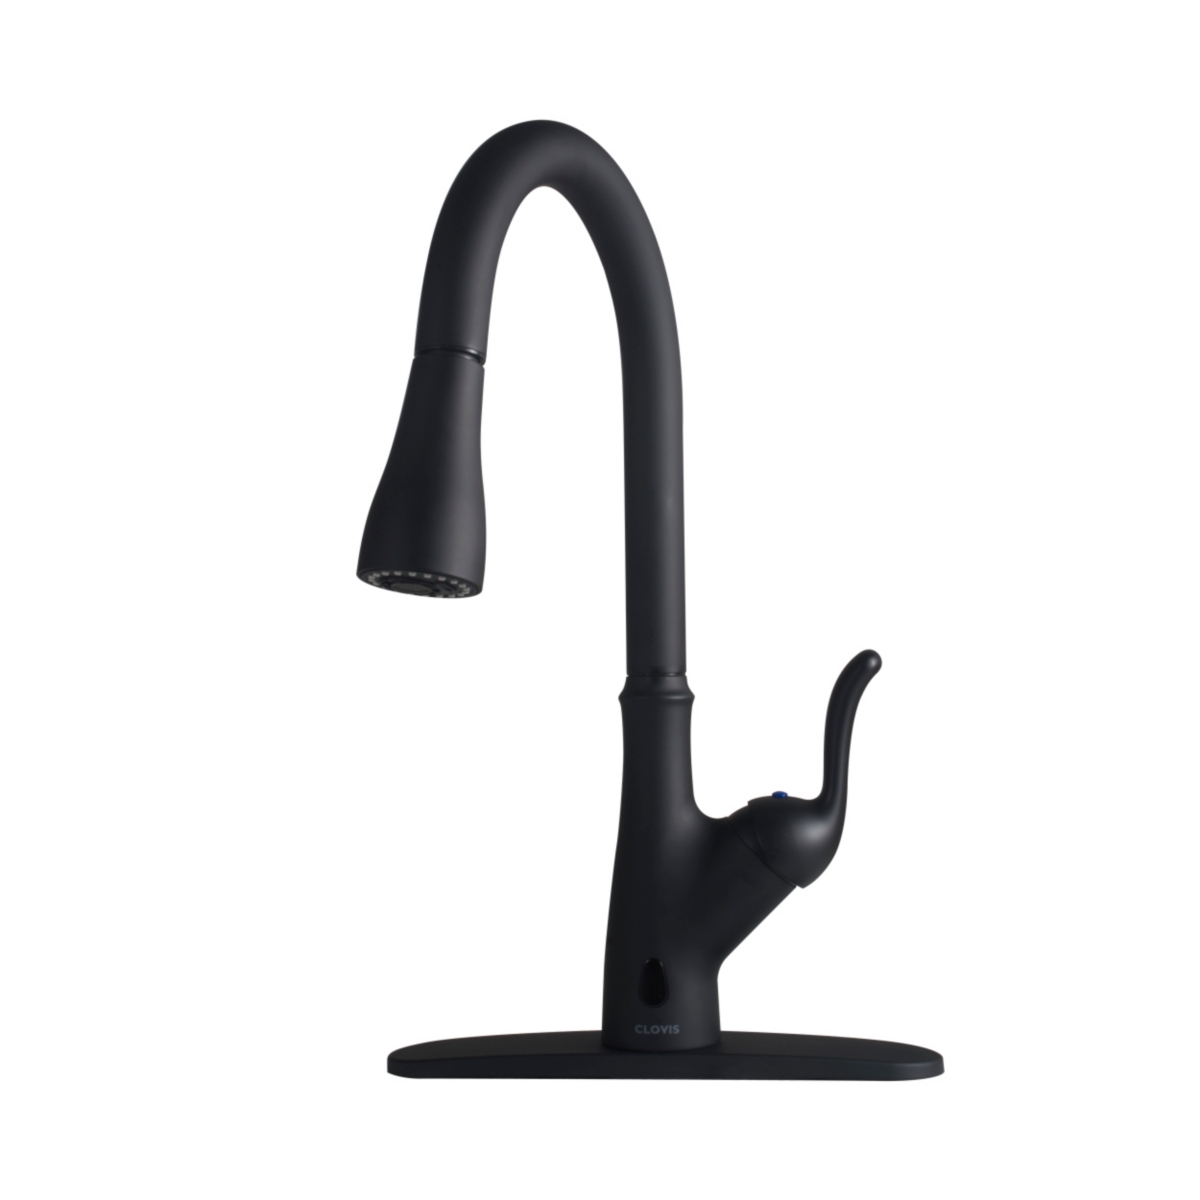 Pull Down Touchless Single Handle Kitchen Faucet - Black